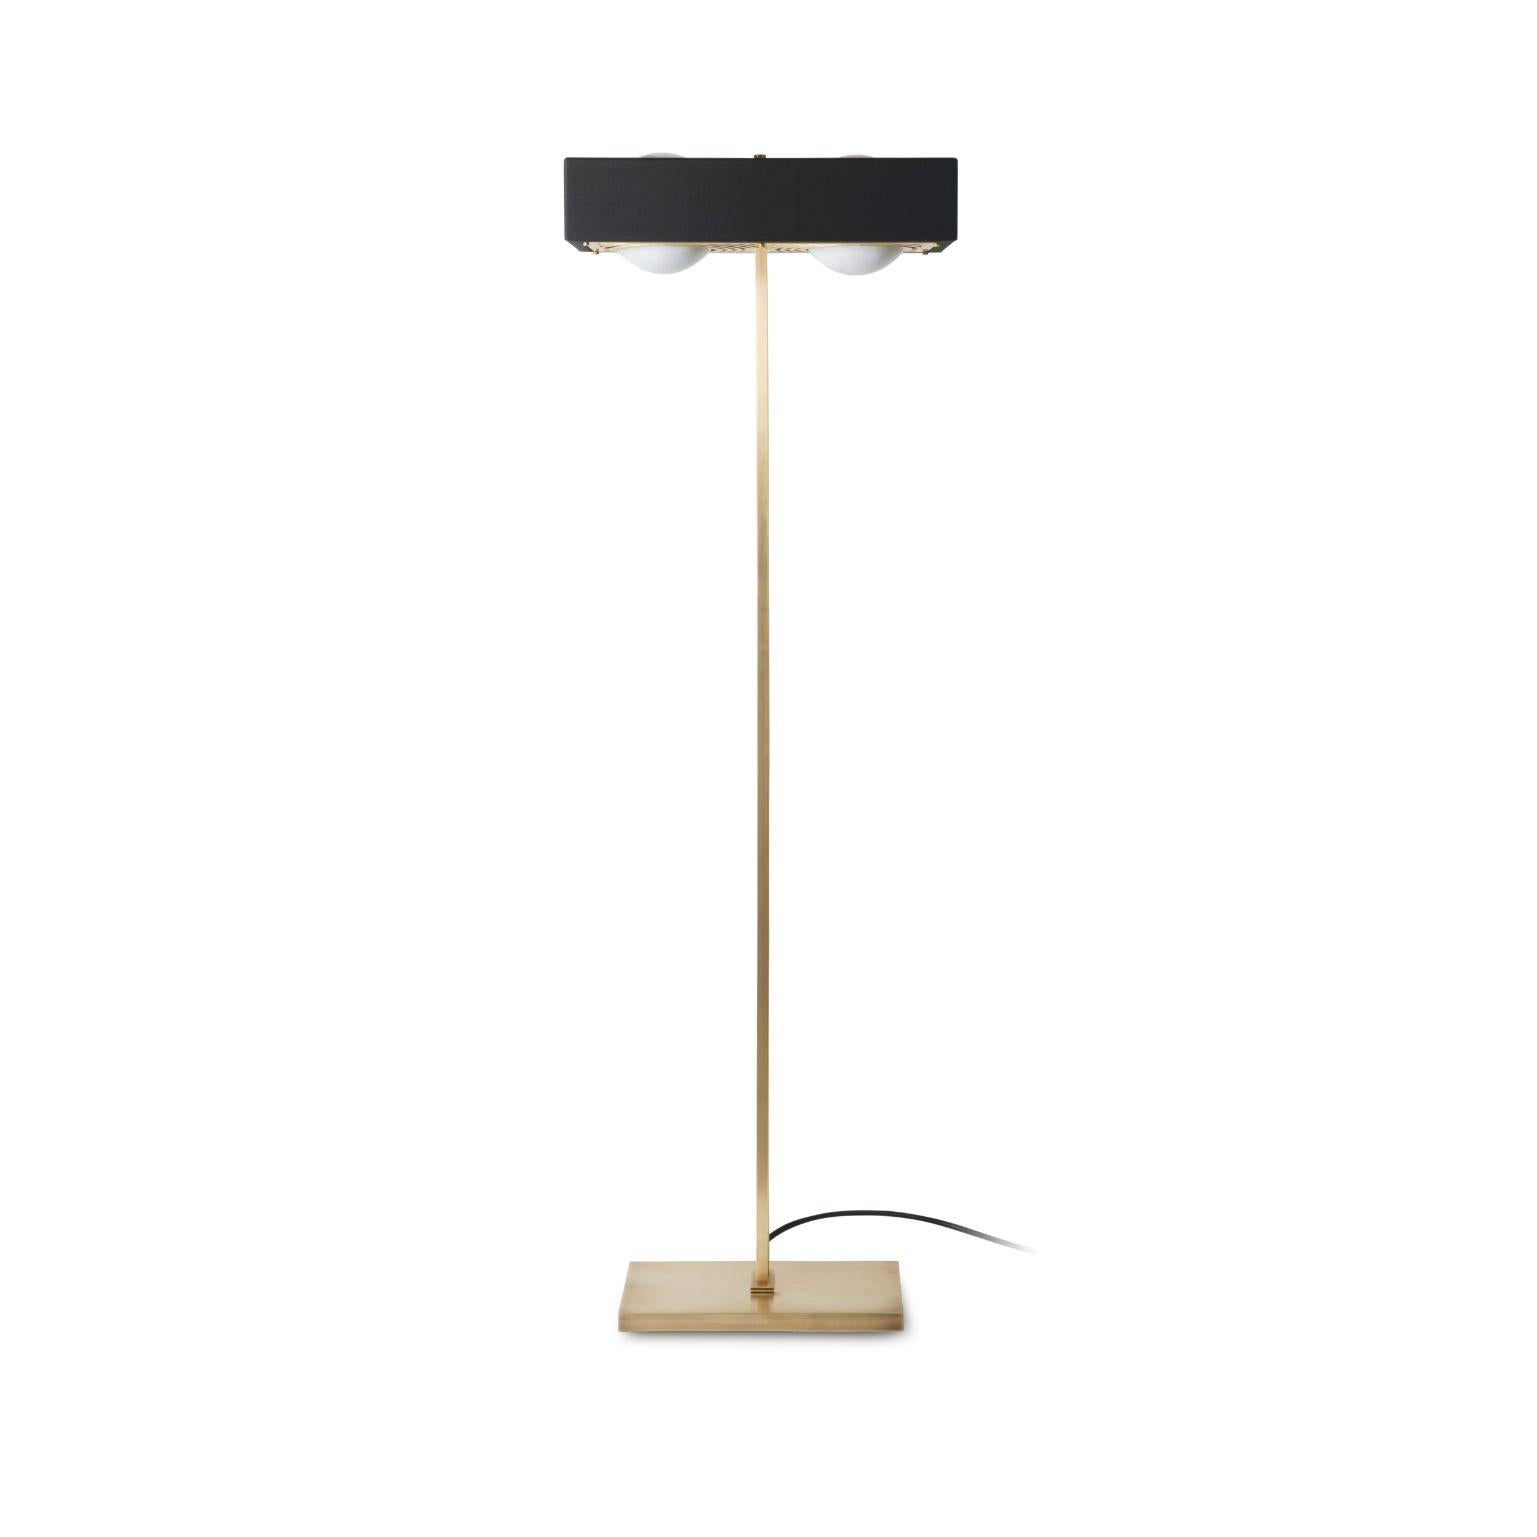 Kernel floor light - Black by Bert Frank
Dimensions: 125 x 40 x 30 cm
Materials: Brass, steel

Brushed brass lacquered as standard, custom finishes available.

When Adam Yeats and Robbie Llewellyn founded Bert Frank in 2013 it was a meeting of minds